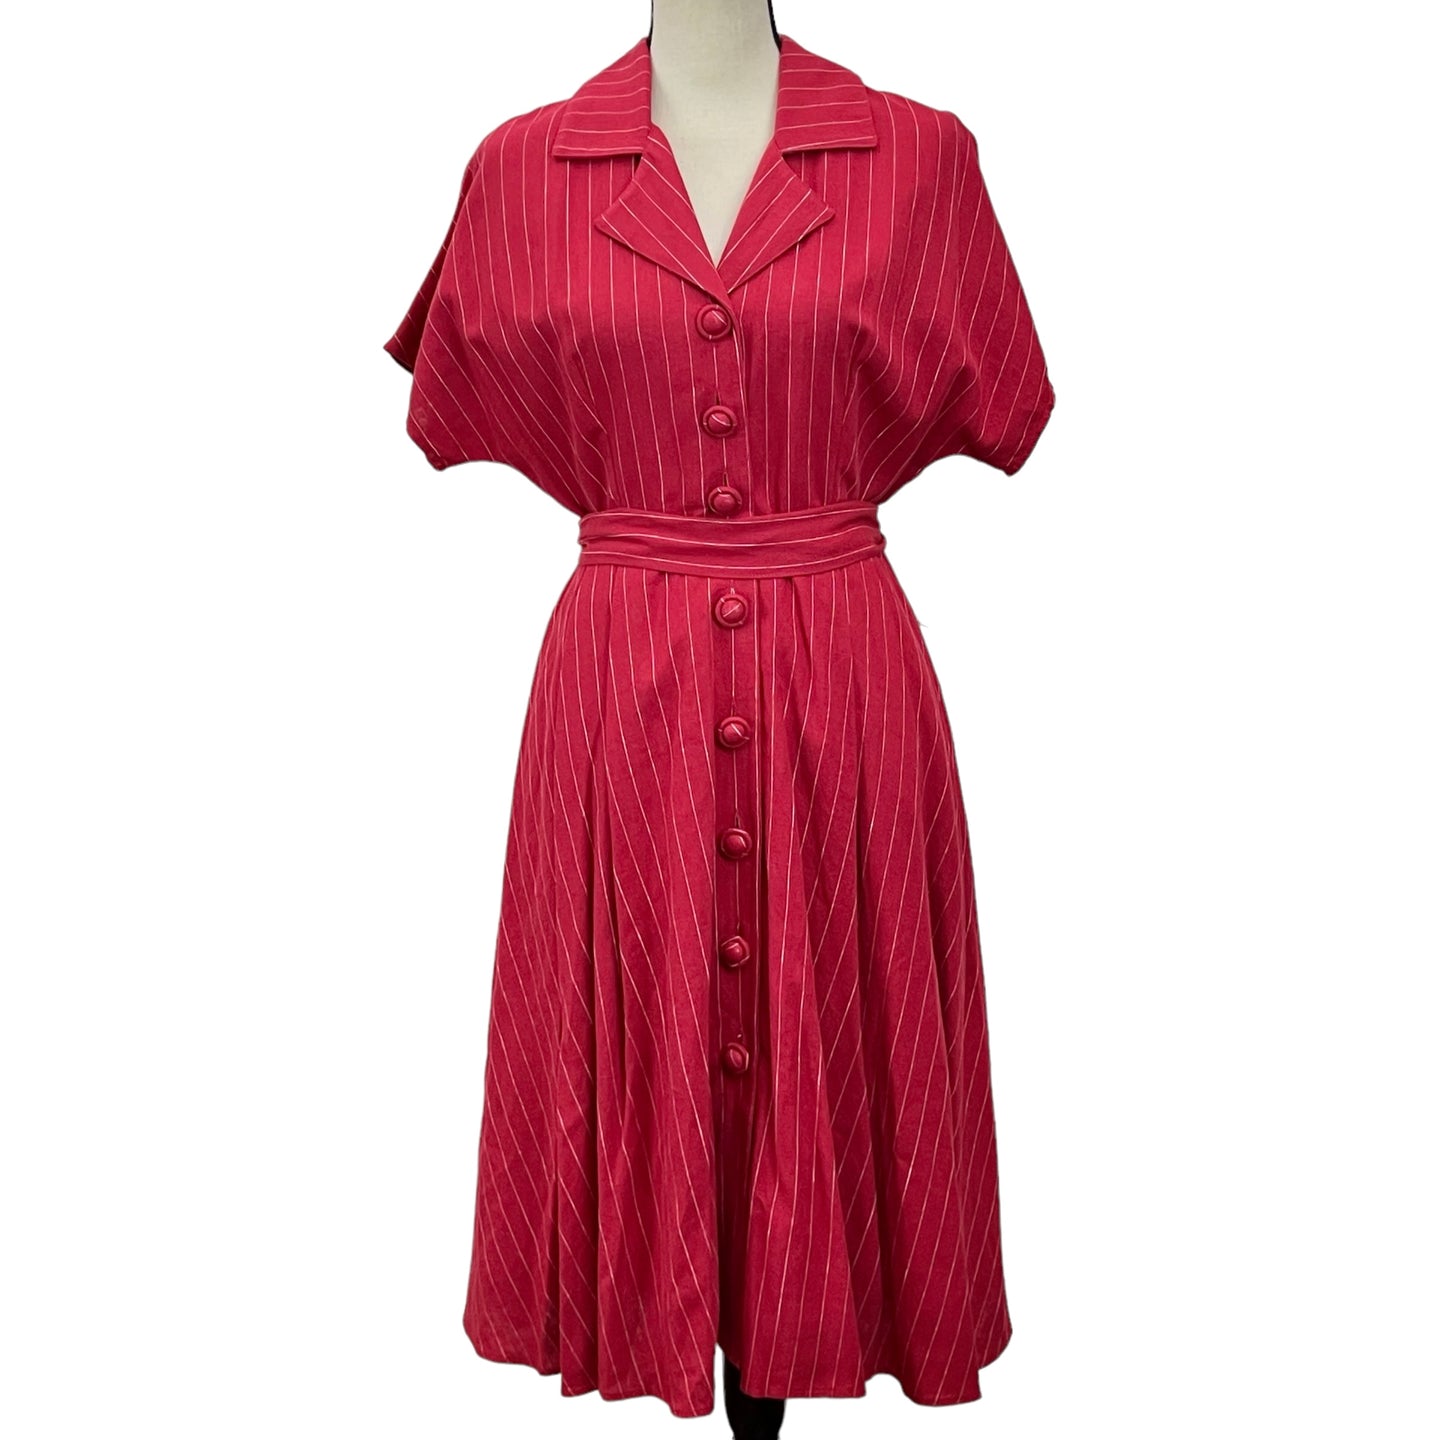 J. Peterman Fit and Flare Red Pinstripe Dress -Size 8. Shell 55% linen 45% viscose, whining 100% cotton. RN 77608. Dry clean only.  Chess 38-39 inches, waist 30 inches, shoulder to hem 43 inches.   Like new condition. 2 spare buttons tag attached.   Processed within 1 business day (not included in shipping carrier’s estimated arrival time). Tracking uploaded immediately upon shipment.